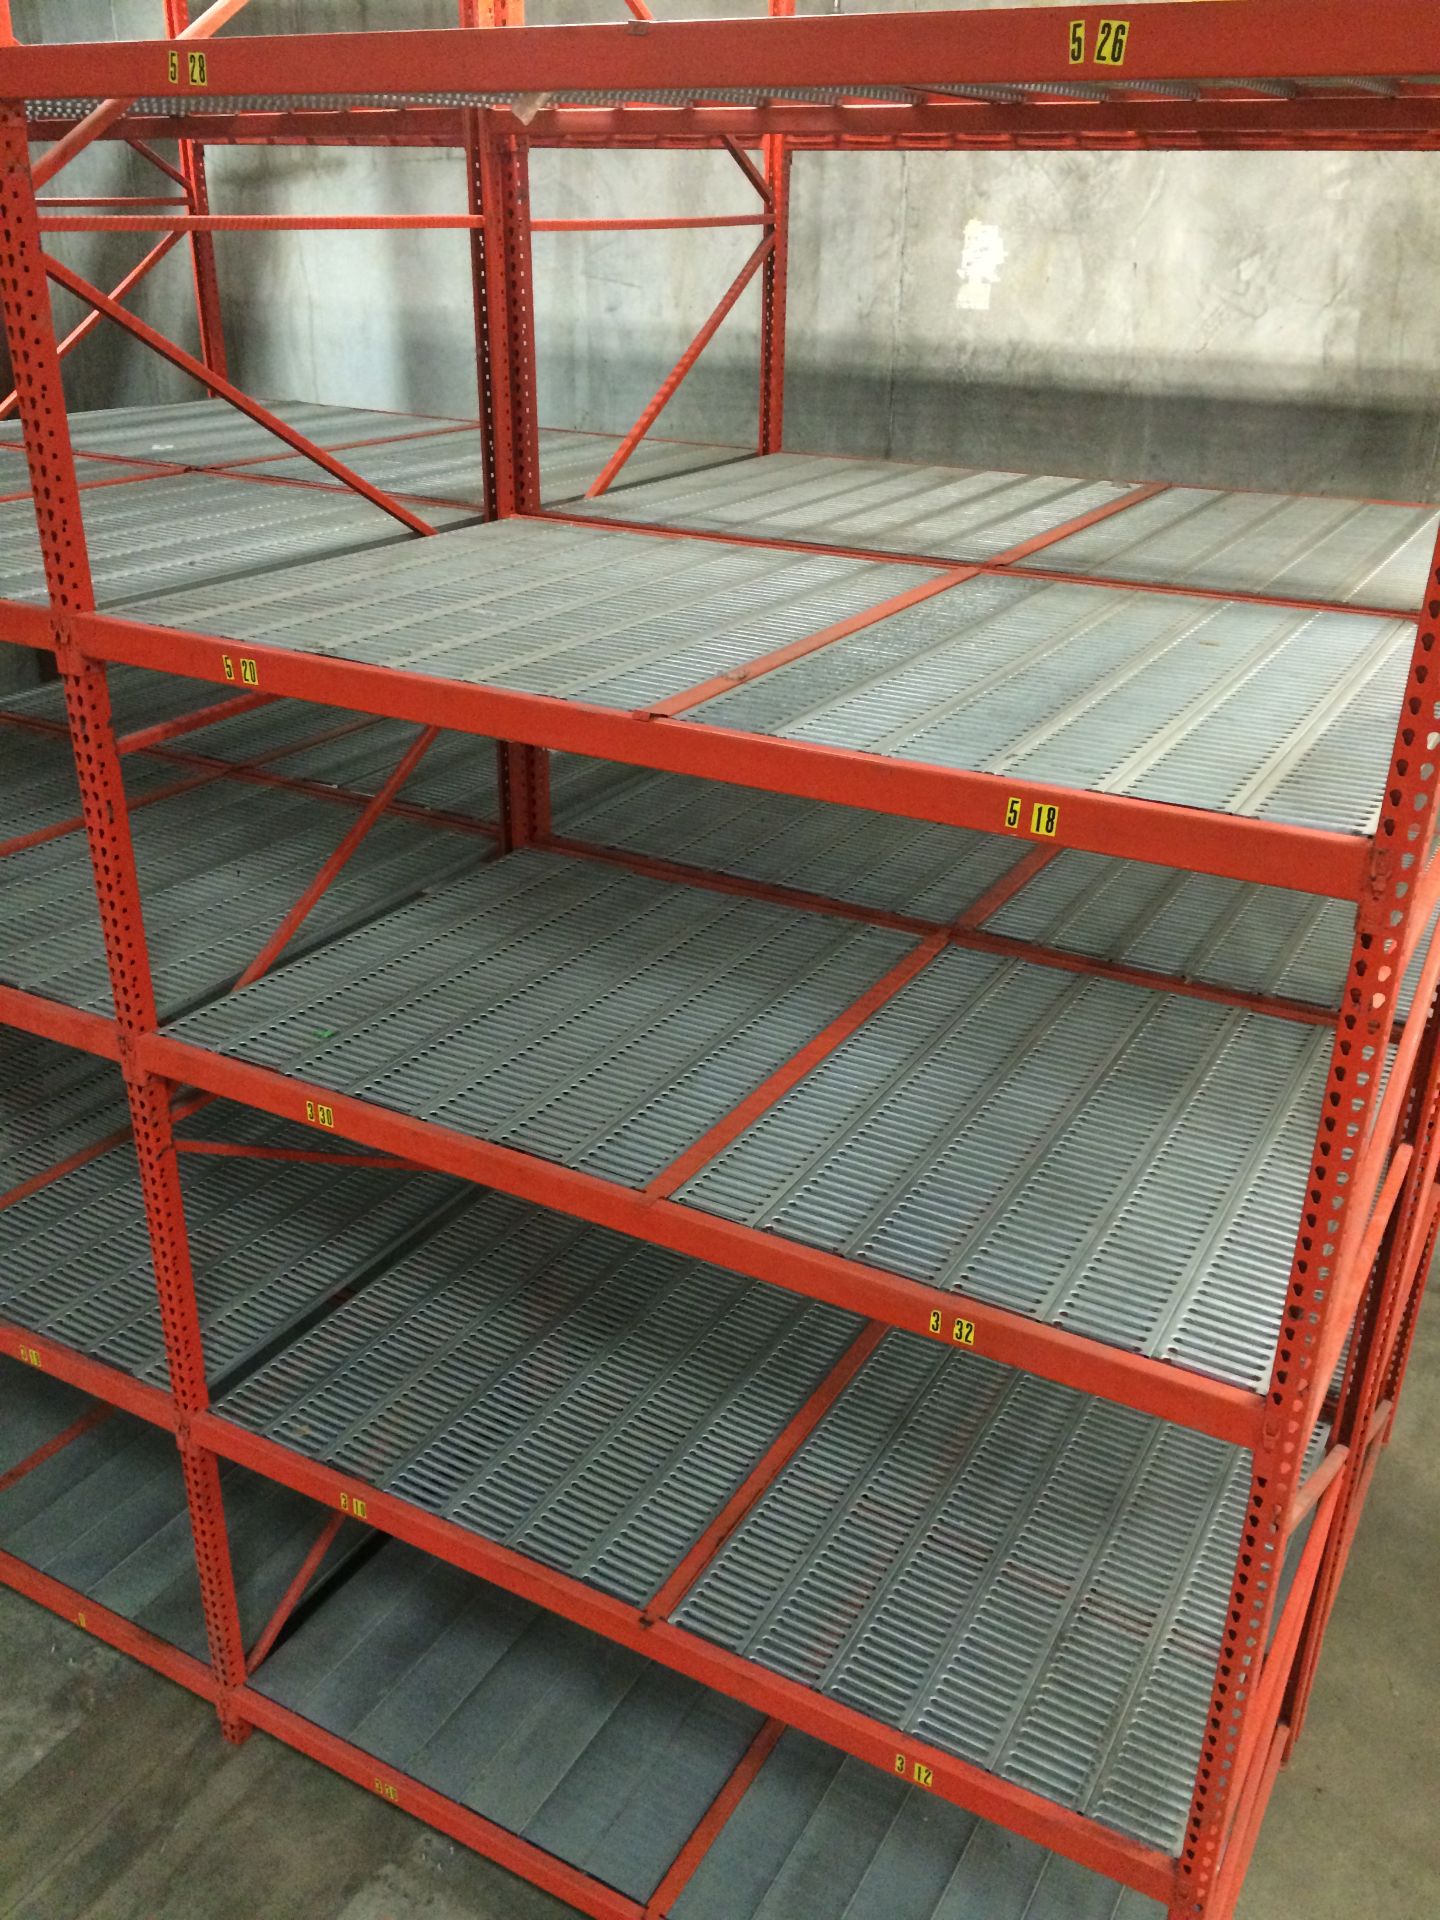 10 BAYS(100 LINEAR FT) OF CARPET STORAGE RACKS WITH PUNCHED DECKING, 4 SHELVES/BAY - Image 12 of 13